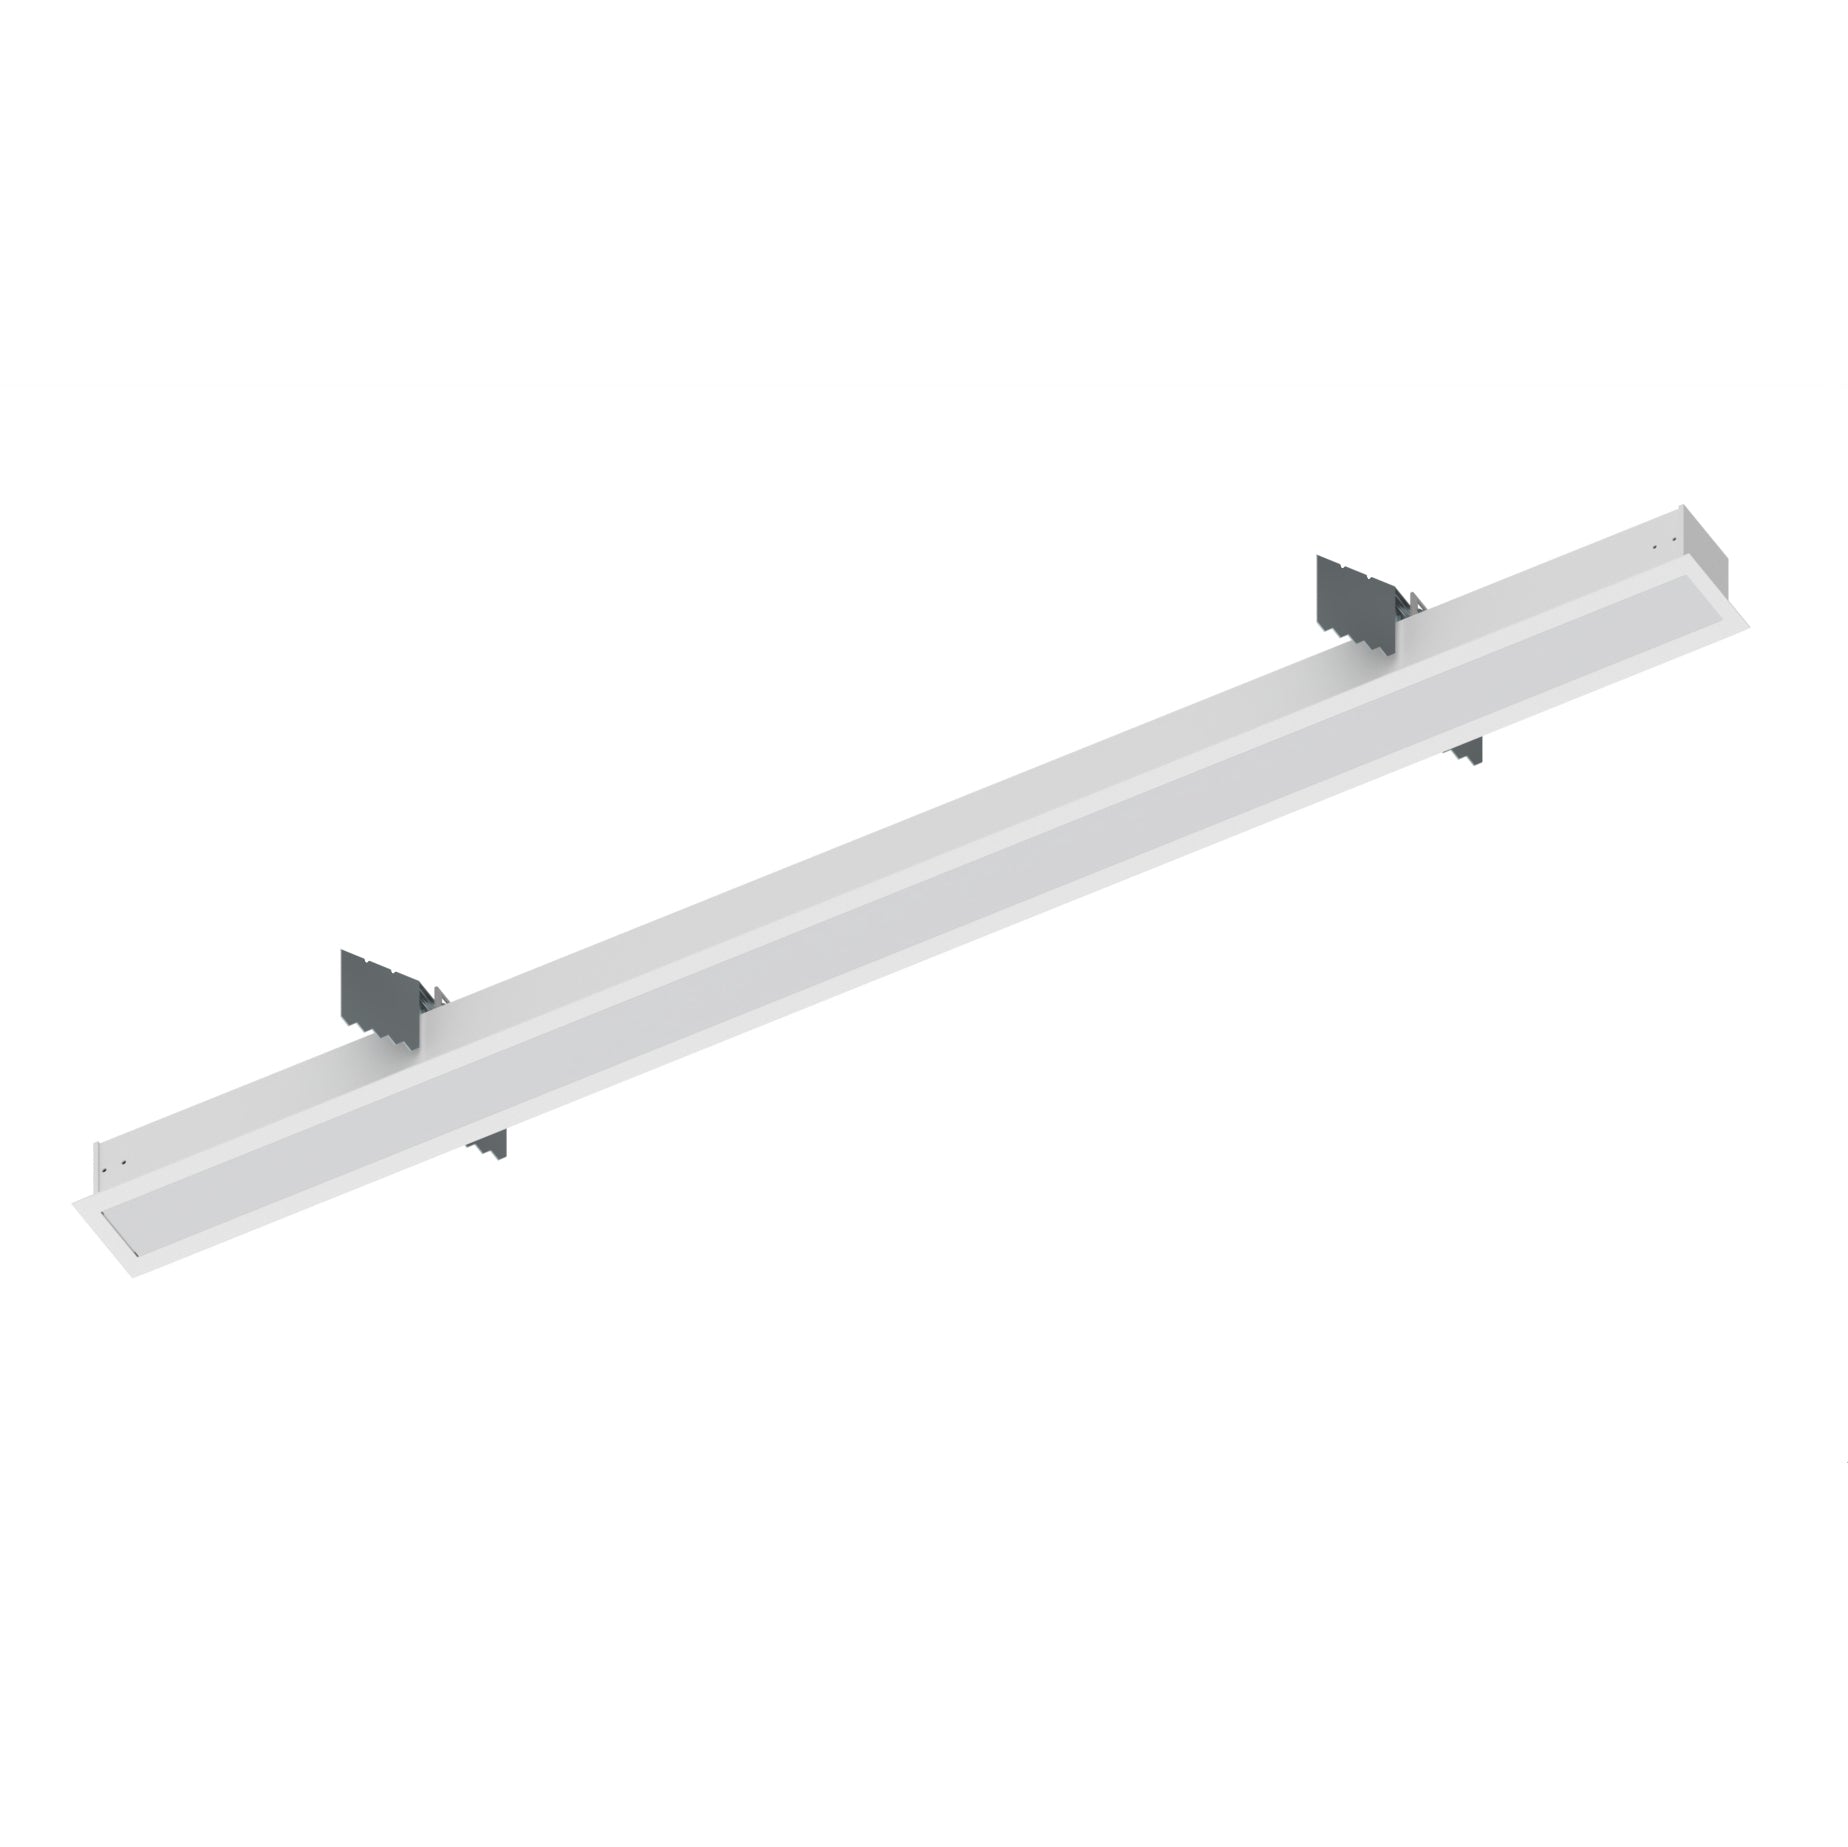 Nora Lighting NRLIN-41040W - Linear - 4' L-Line LED Recessed Linear, 4200lm / 4000K, White Finish